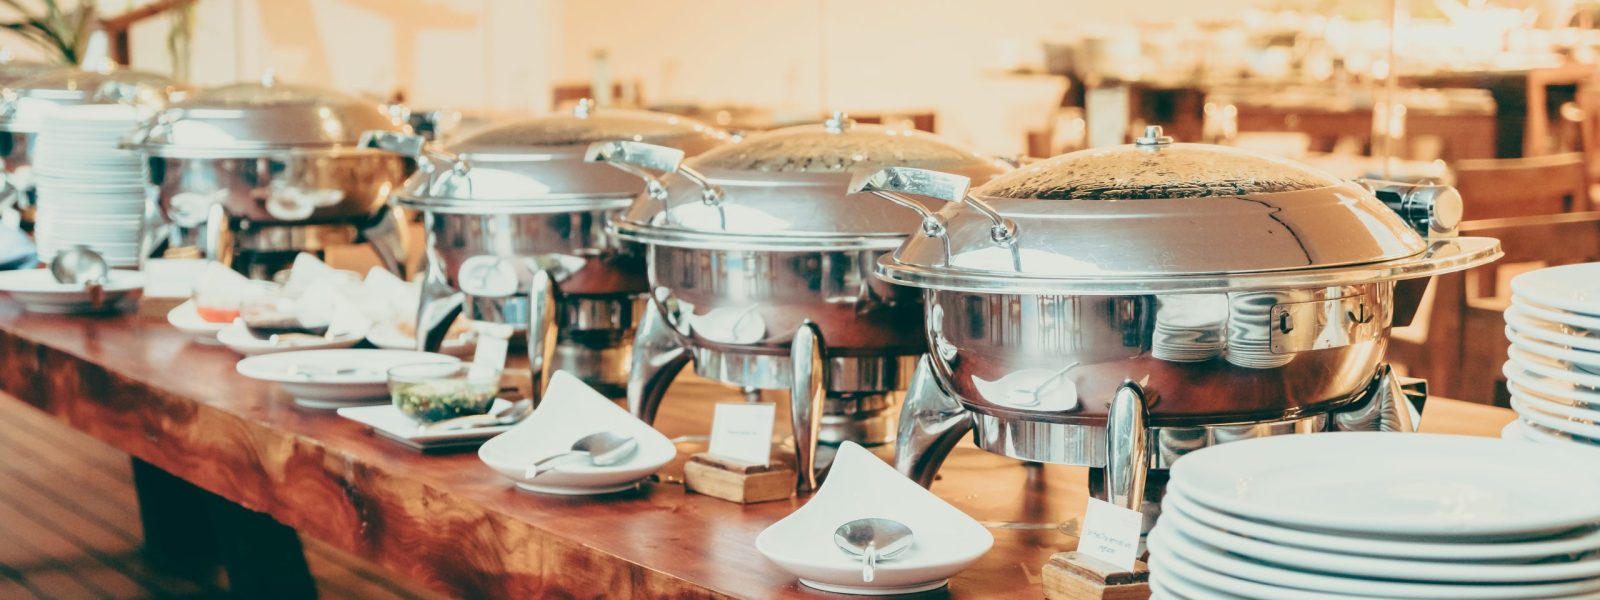 Selective focus point on Catering buffet in hotel restaurant - Vintage filter effect